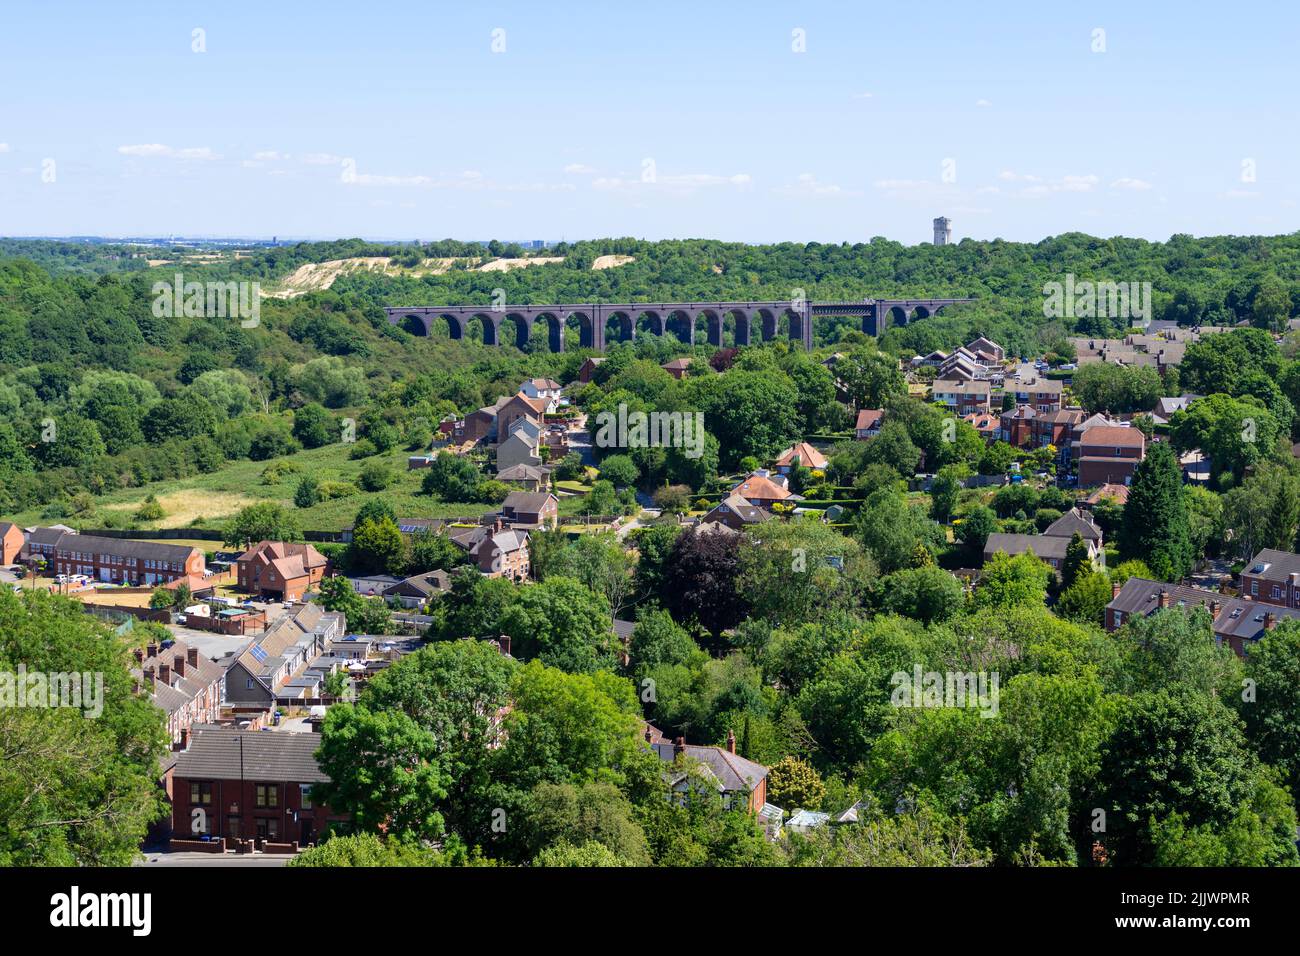 Aerial view of Conisbrough town and Conisbrough Viaduct a disused railway viaduct Conisbrough near Doncaster South Yorkshire England Uk GB Europe Stock Photo